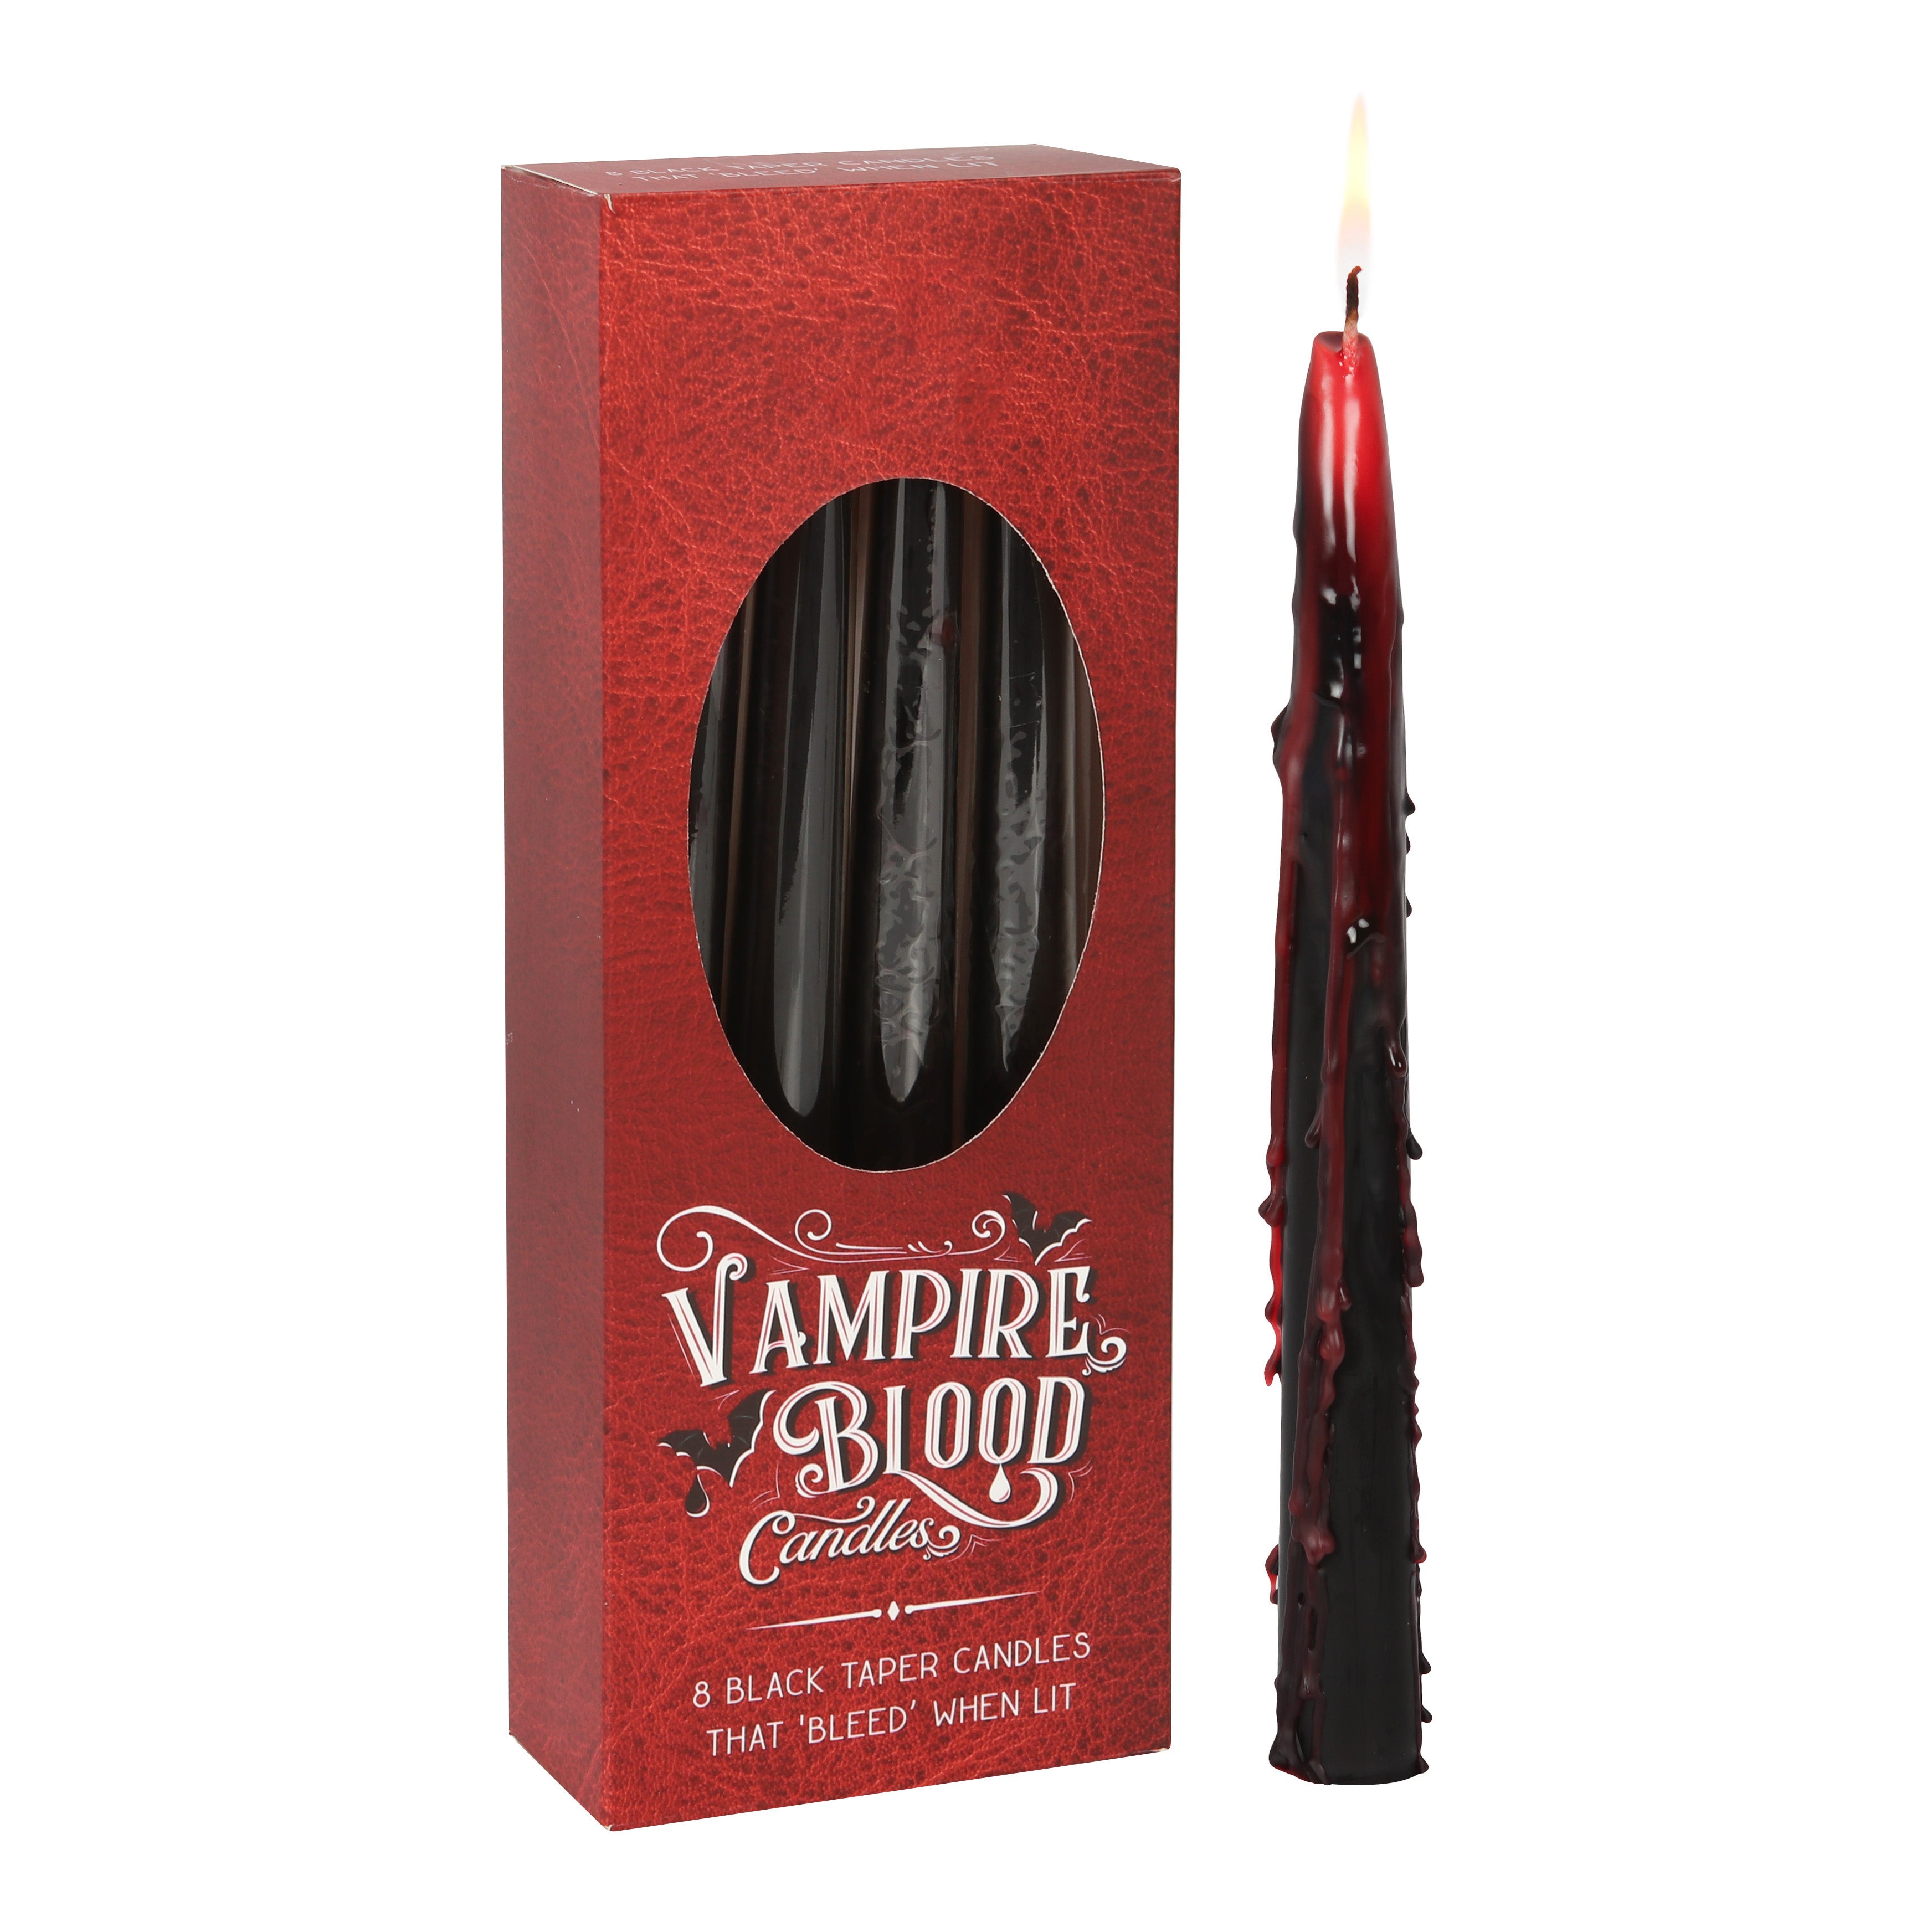 View Set of 8 Vampire Blood Taper Candles information